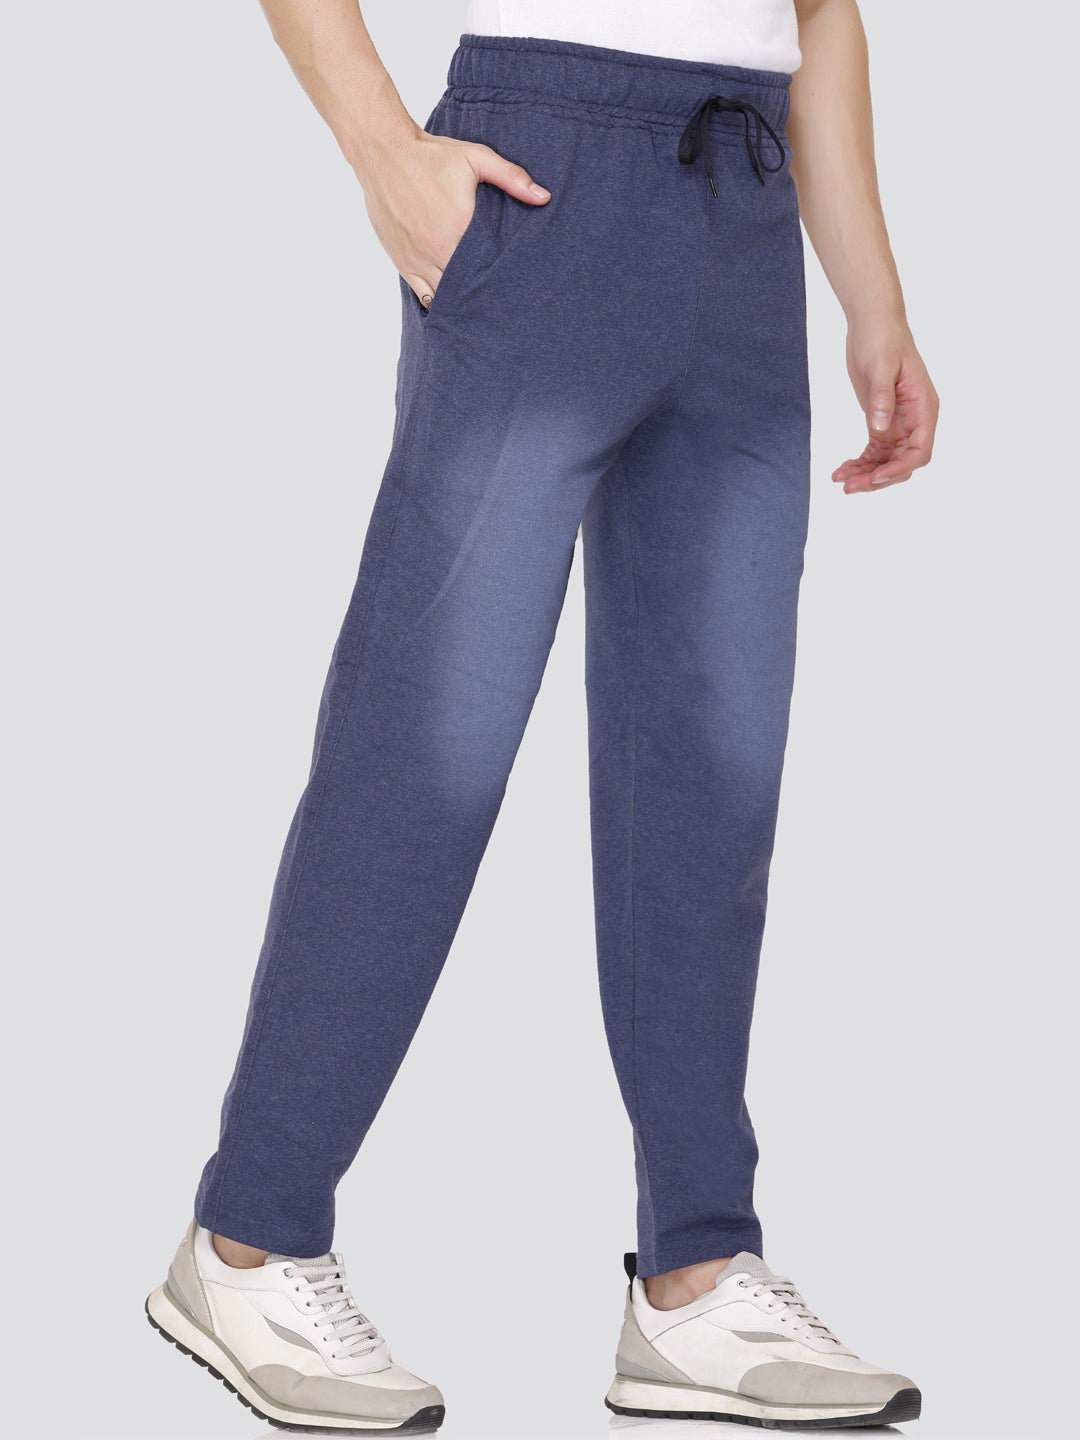 Stylish Denim Shaded Jinxer Cotton Trackpants for Women online in India